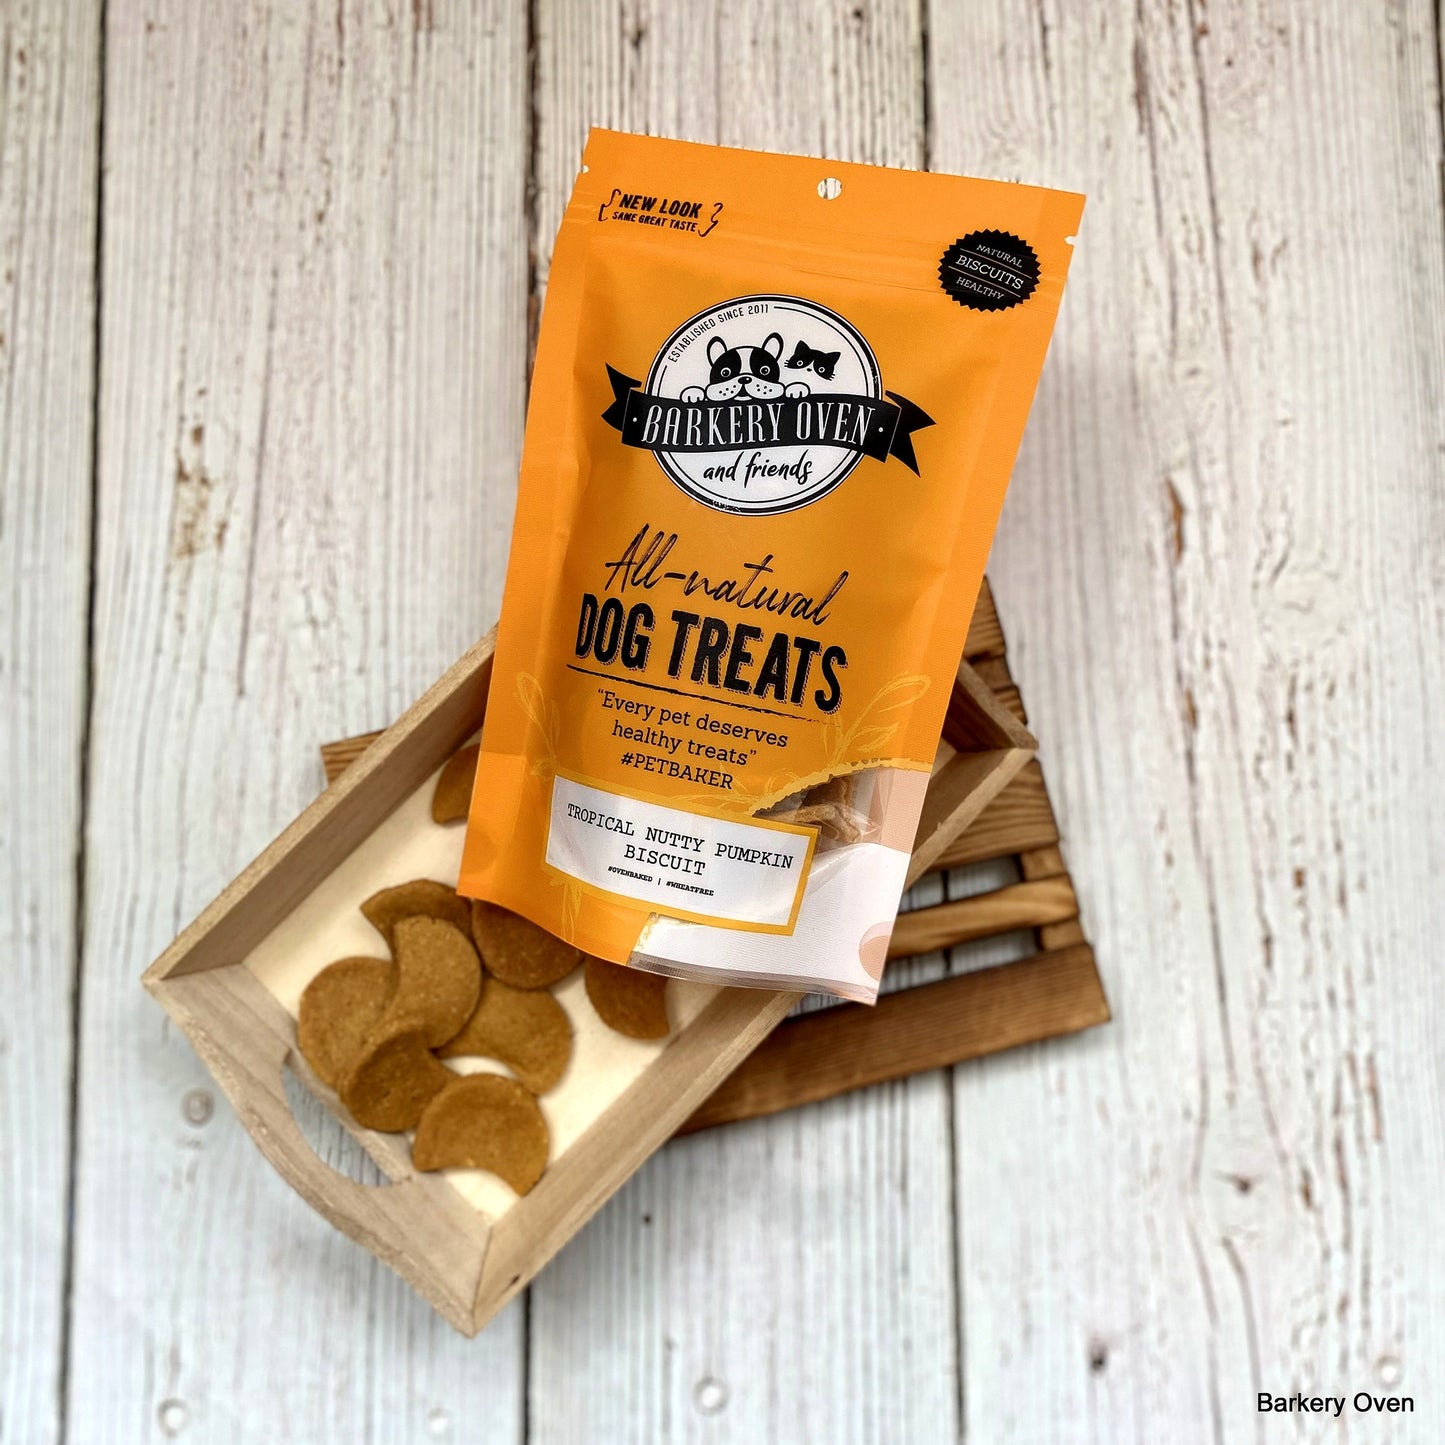 Barkery Oven Wheat Free Tropical Nutty Pumpkin Biscuit Dog Treats